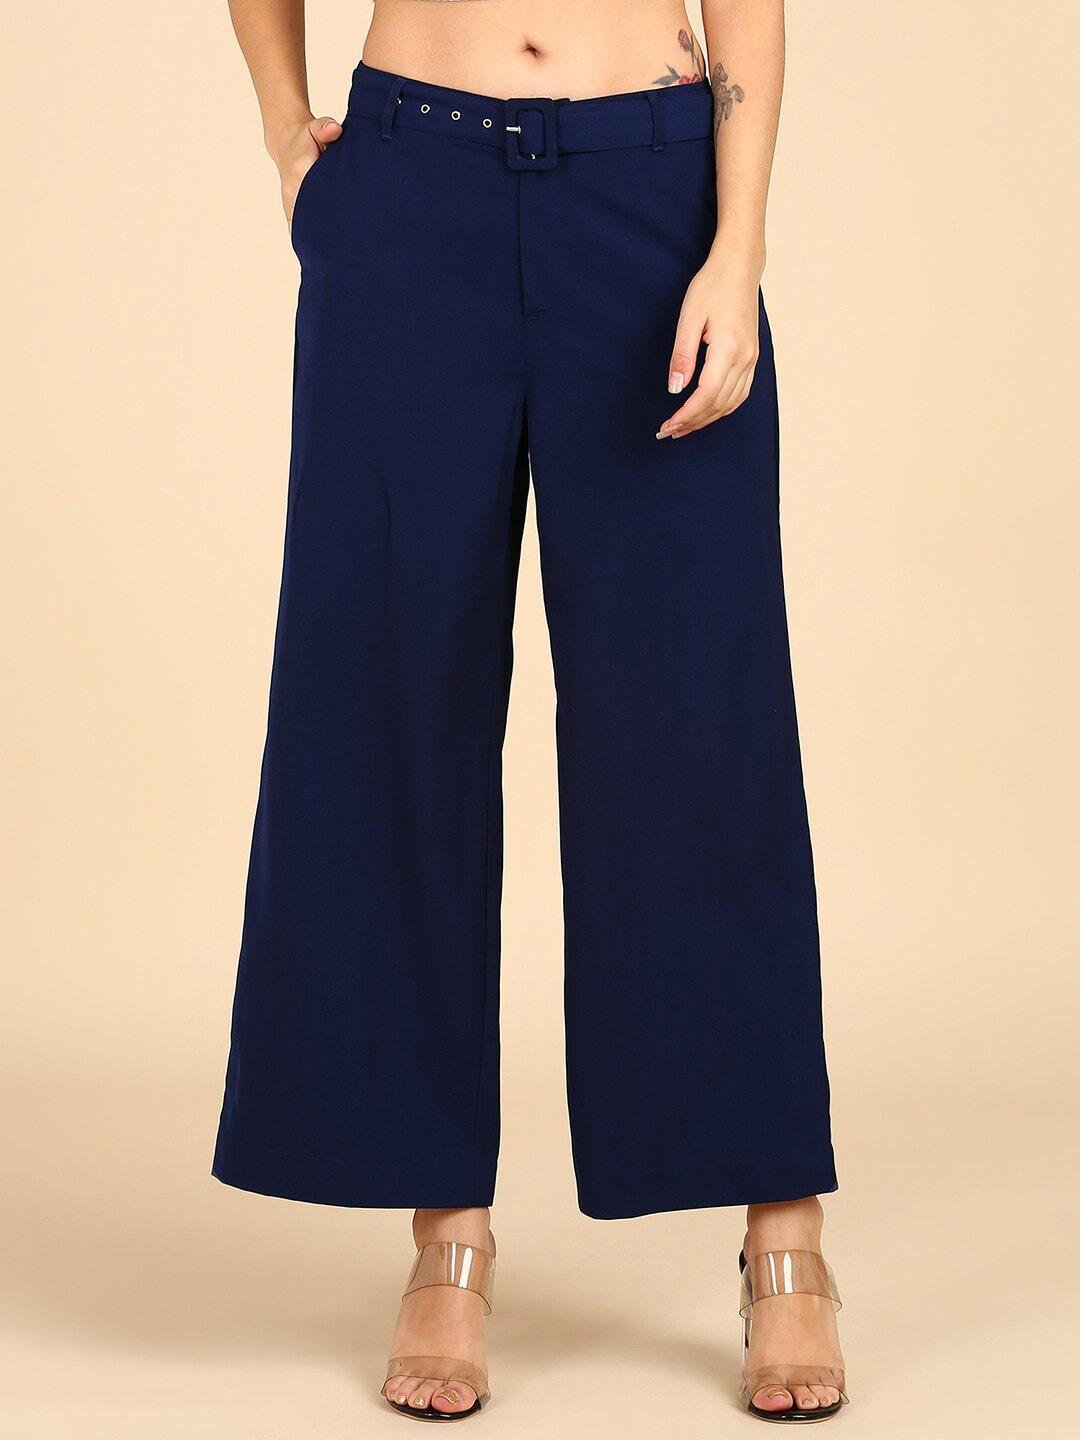 mast-&-harbour-women-navy-blue-smart-flared-parallel-trousers